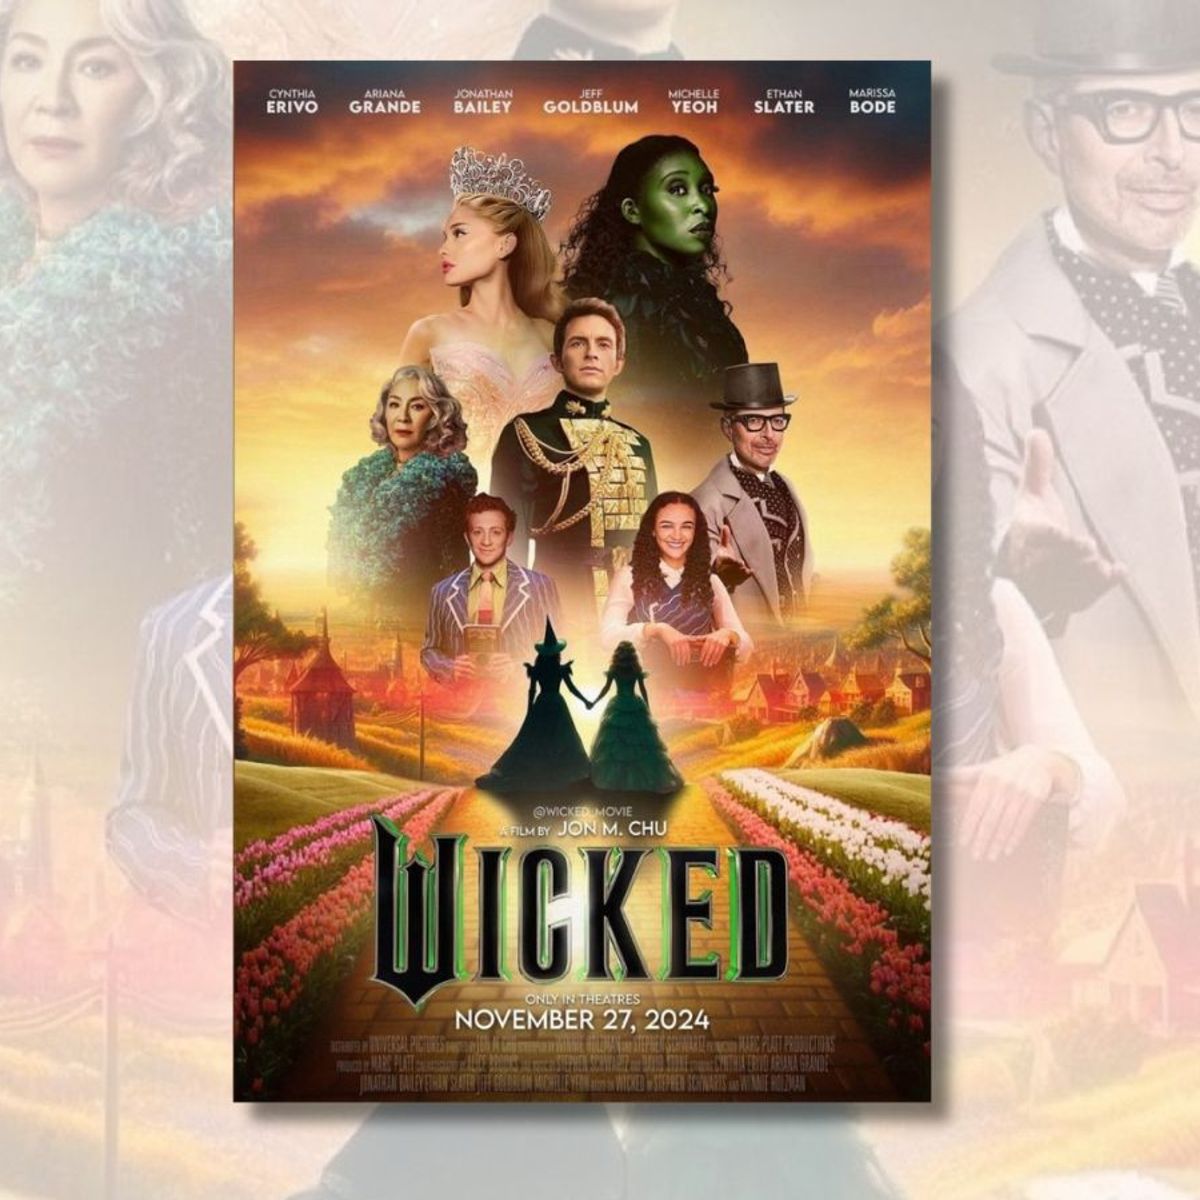 Is This an Official Movie Poster for the Film 'Wicked'?